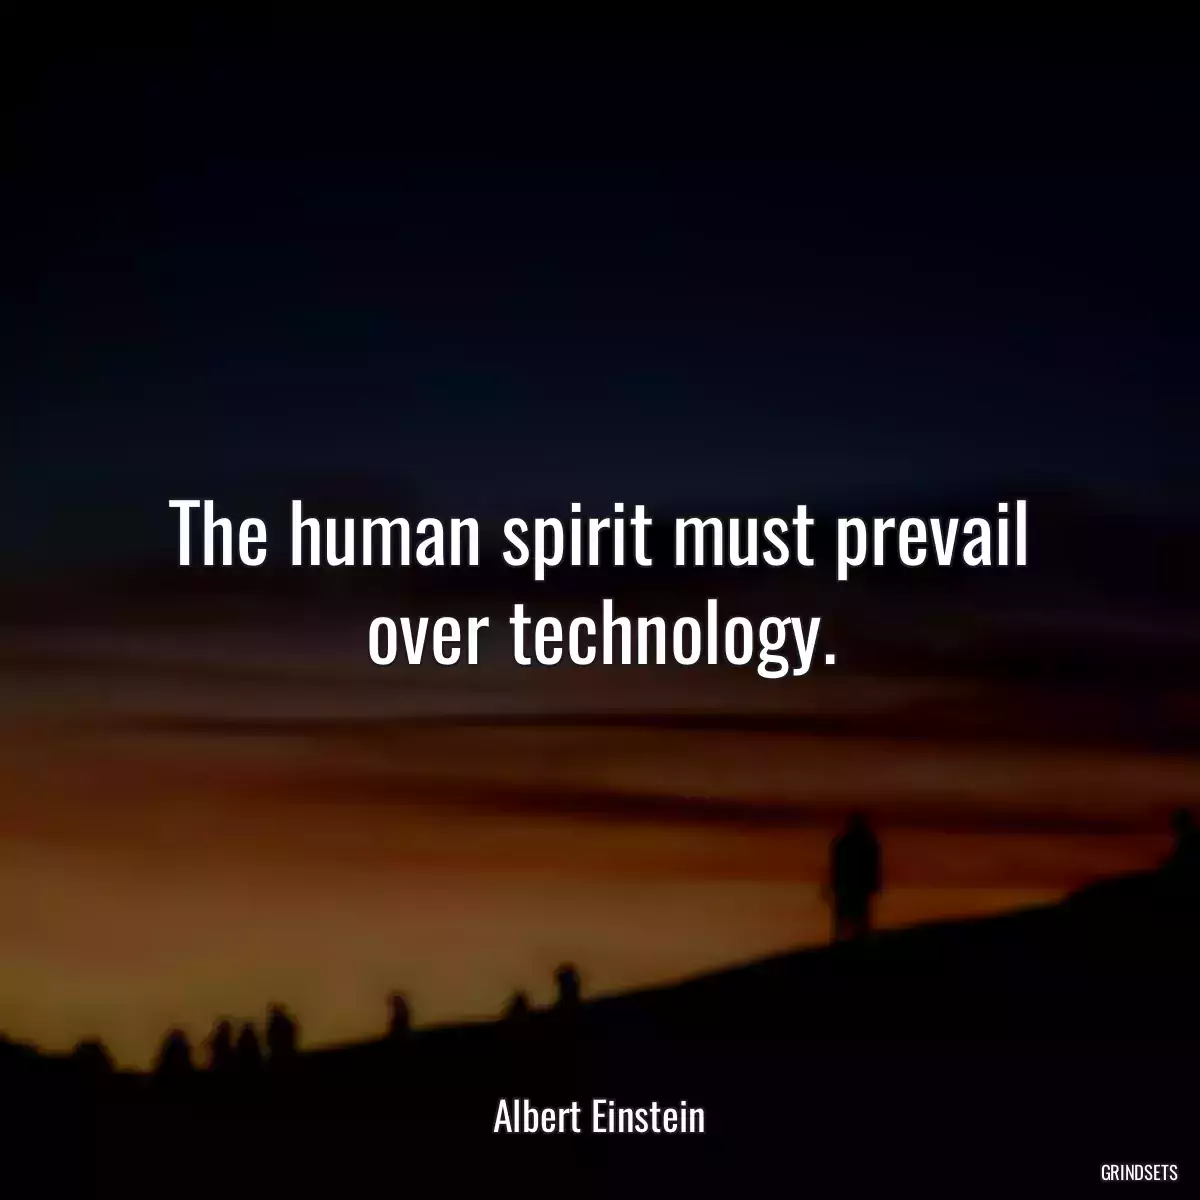 The human spirit must prevail over technology.